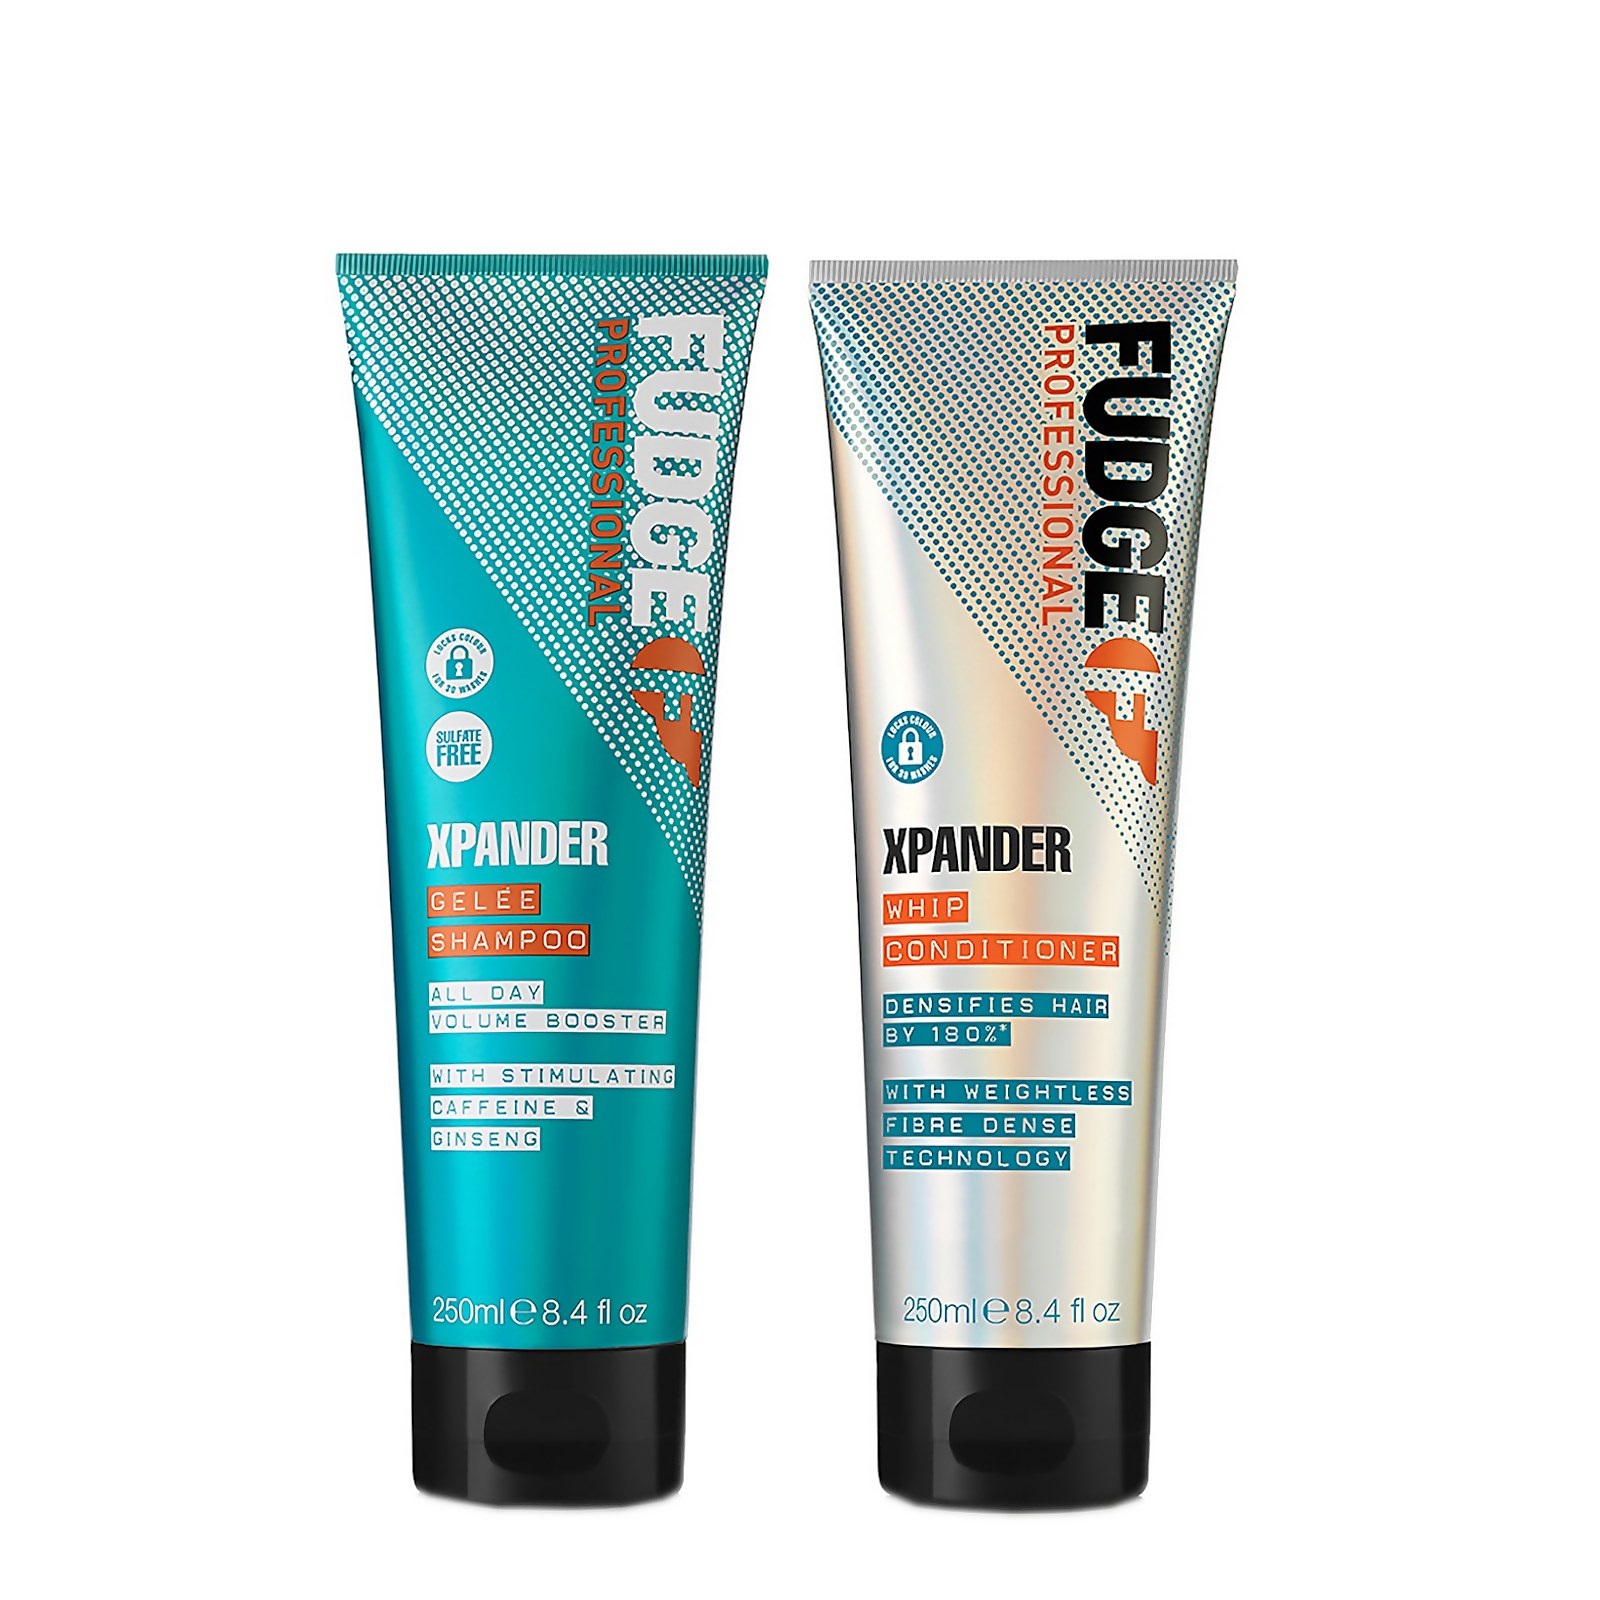 Fudge UK: Save 20% on selected Hair Care Bundles and get free gift